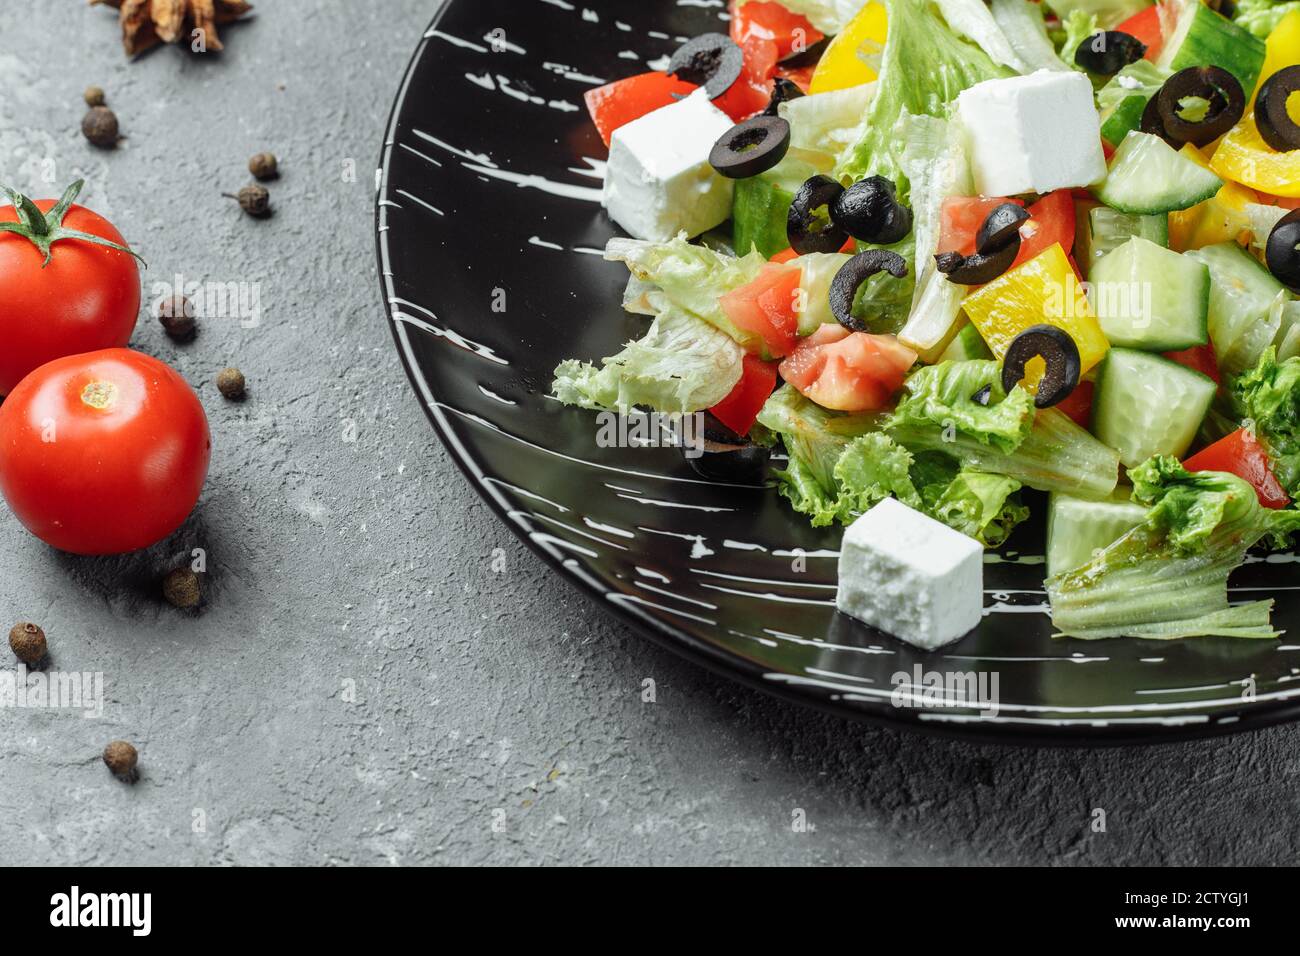 Greek Salad with Cucumeber, Kalamata Olives, Feta Cheese, Juicy Cherry Tomatoes and Fresh Basil. Concept for a tasty and healthy vegetarian meal Stock Photo